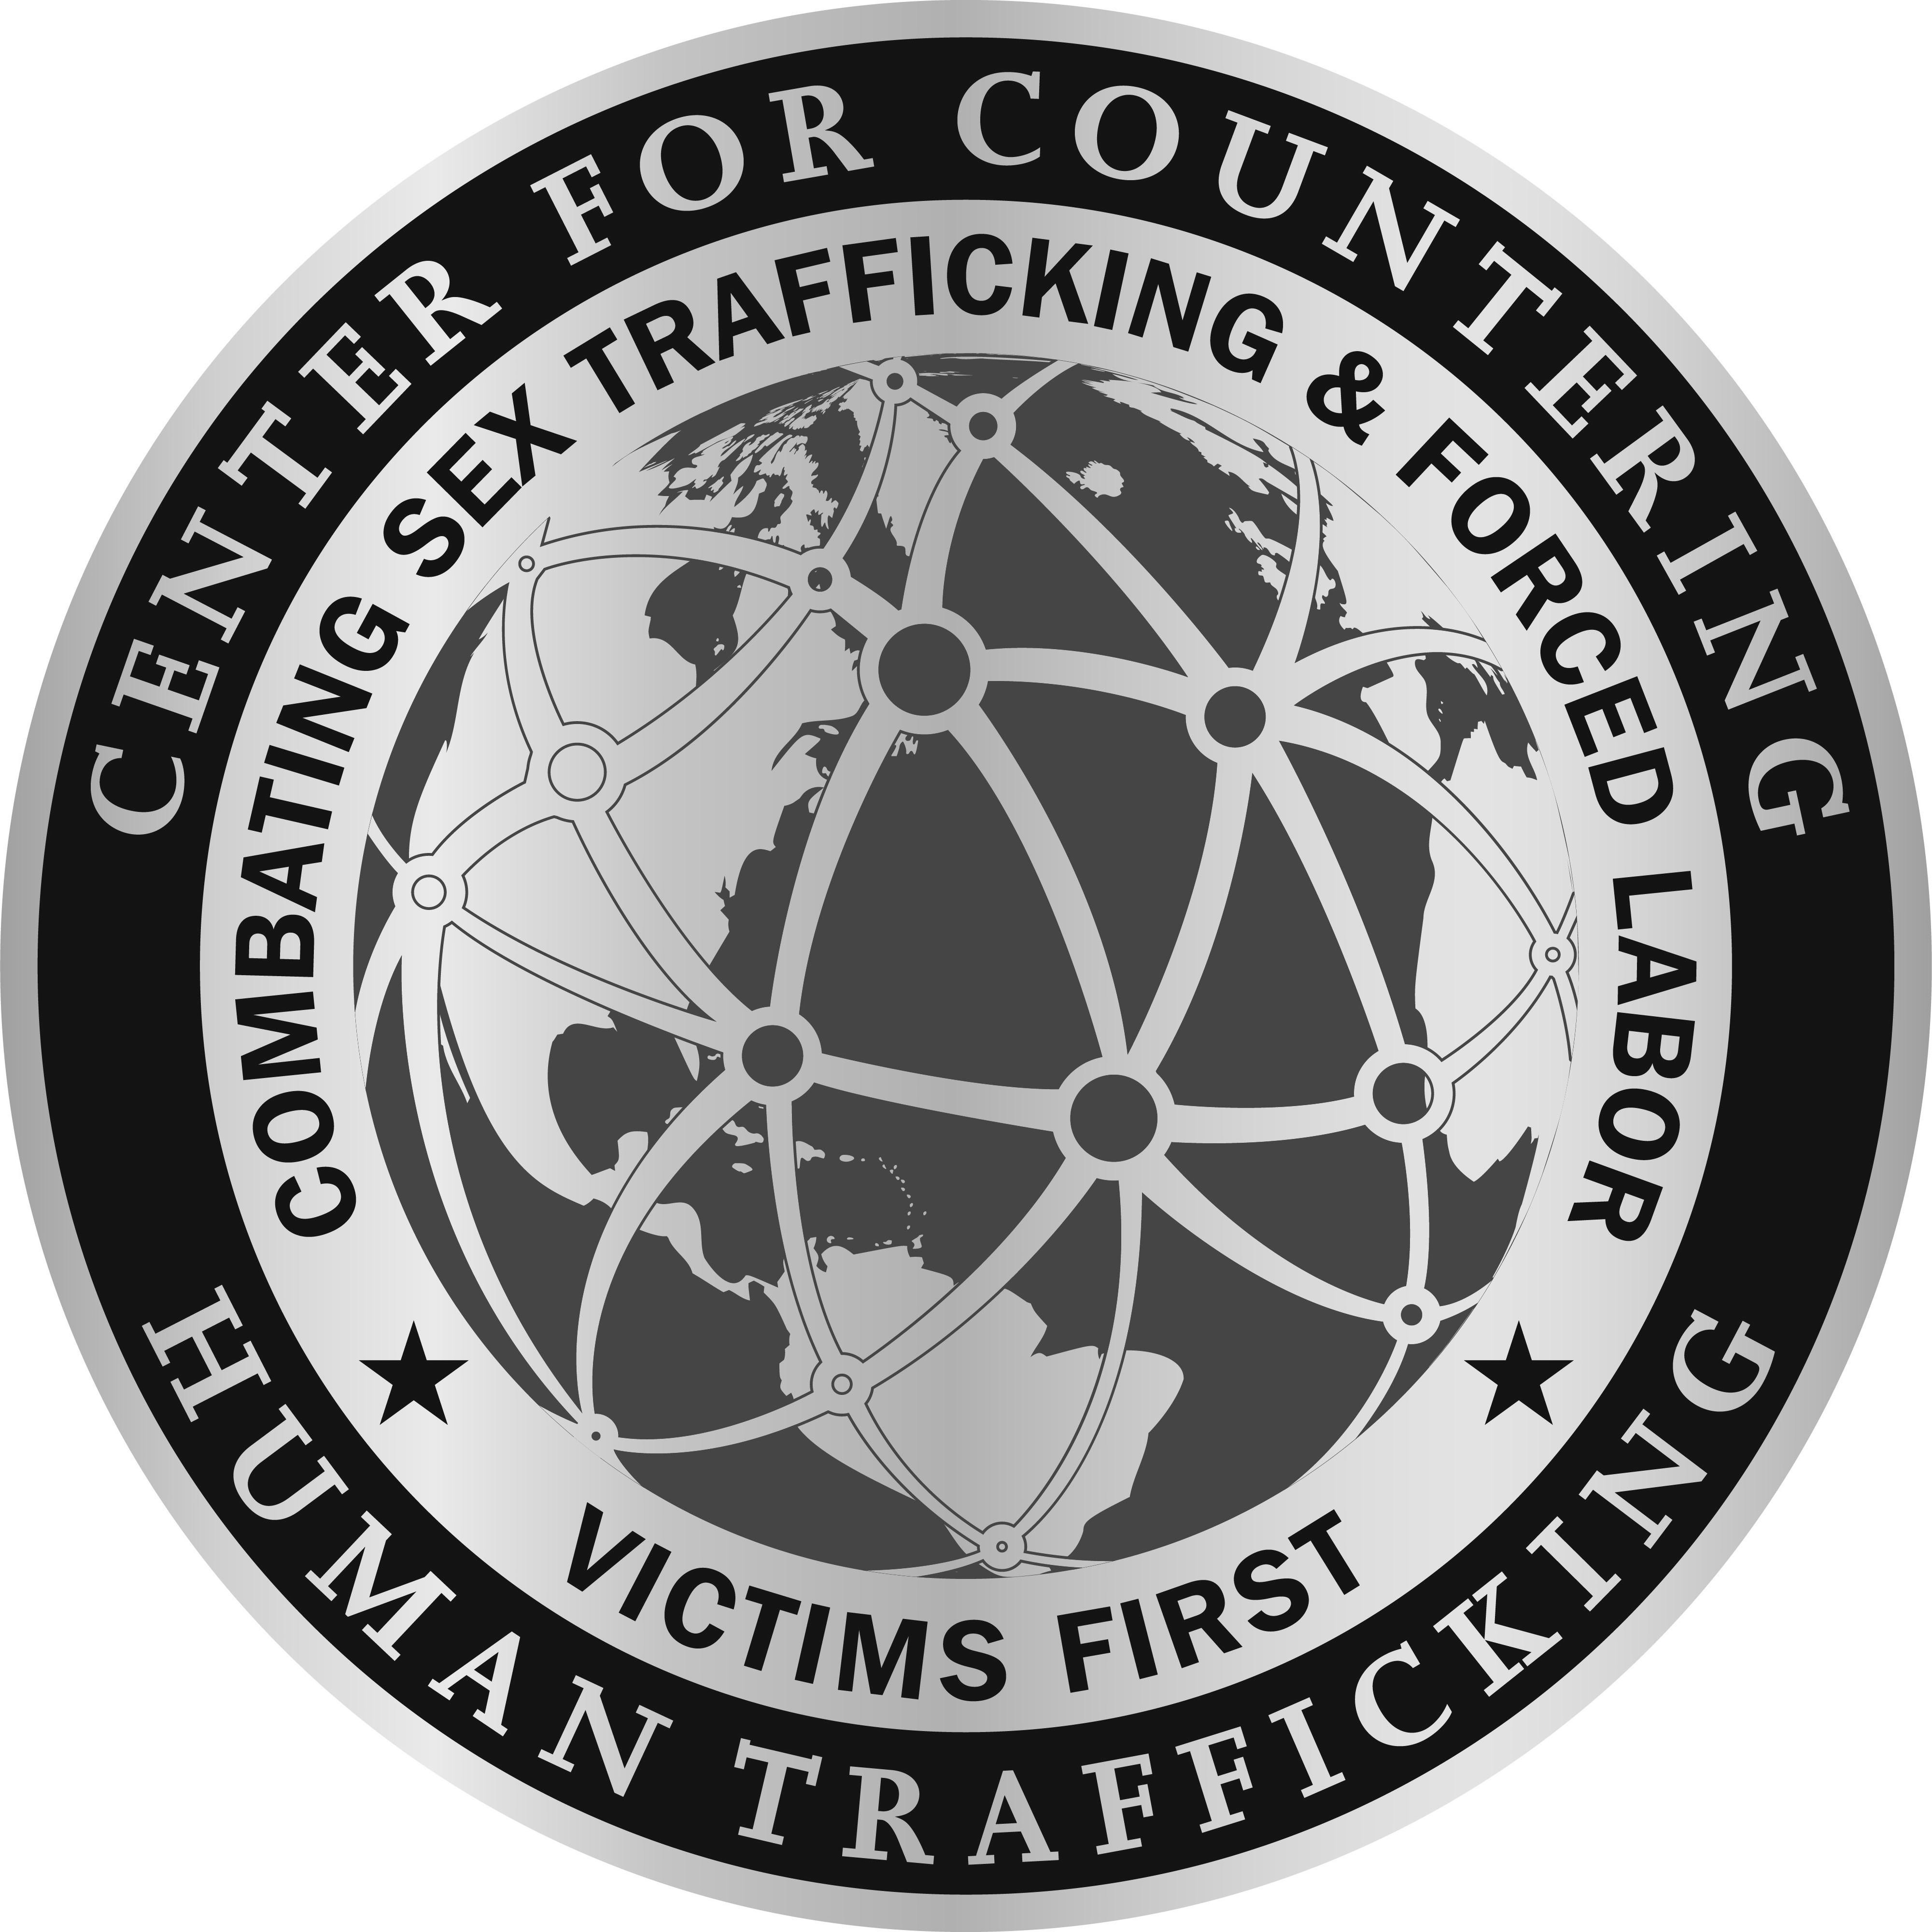  CENTER FOR COUNTERING HUMAN TRAFFICKINGCOMBATING SEX TRAFFICKING &amp; FORCED LABORVICTIMS FIRST